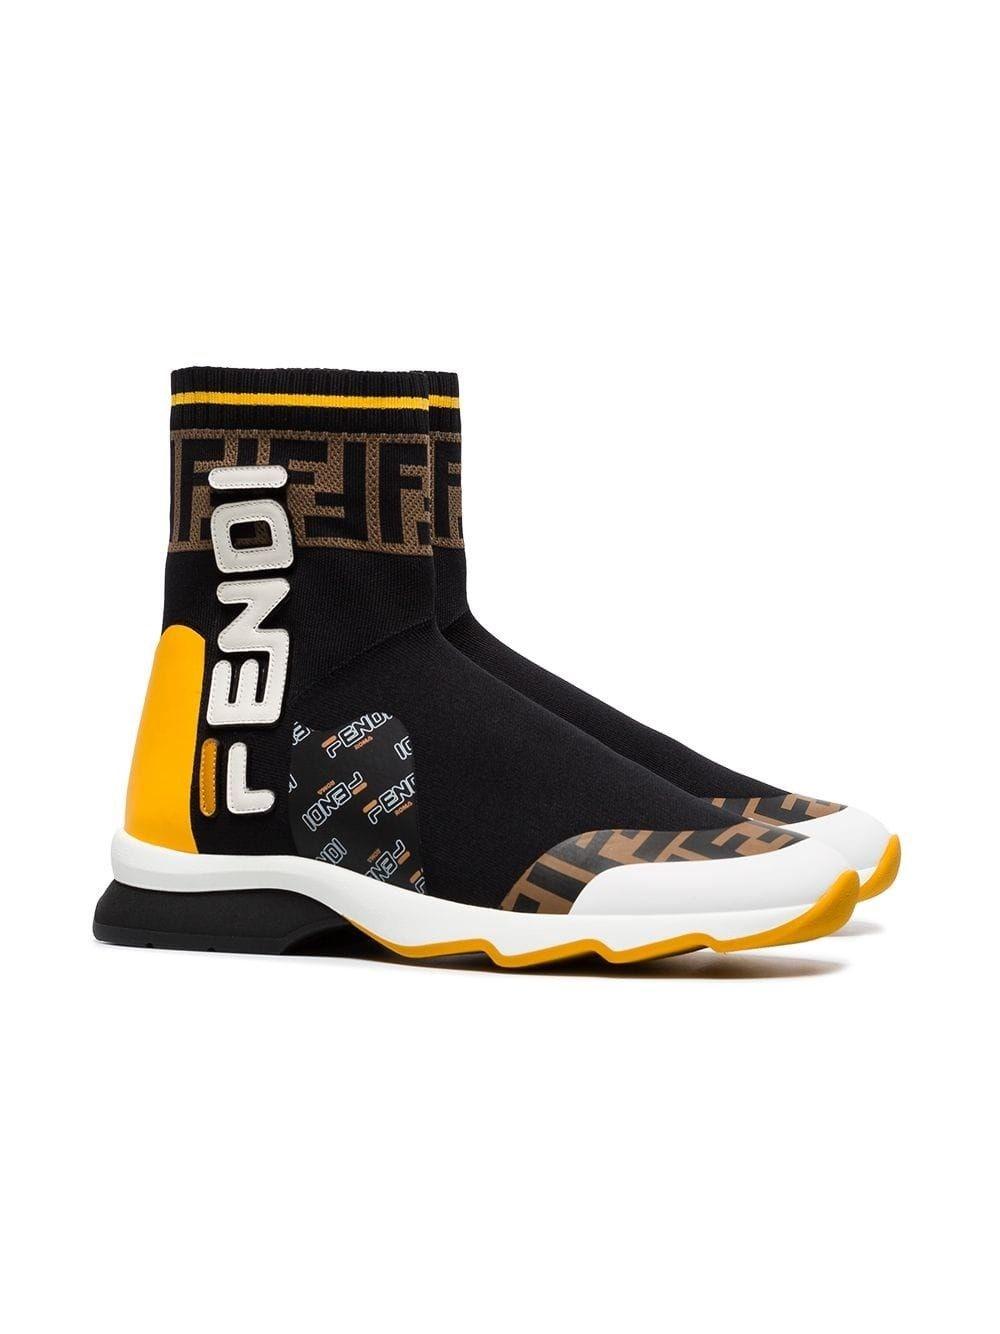 Fendi Mania Rocko Leather Sock Boots in White | Lyst